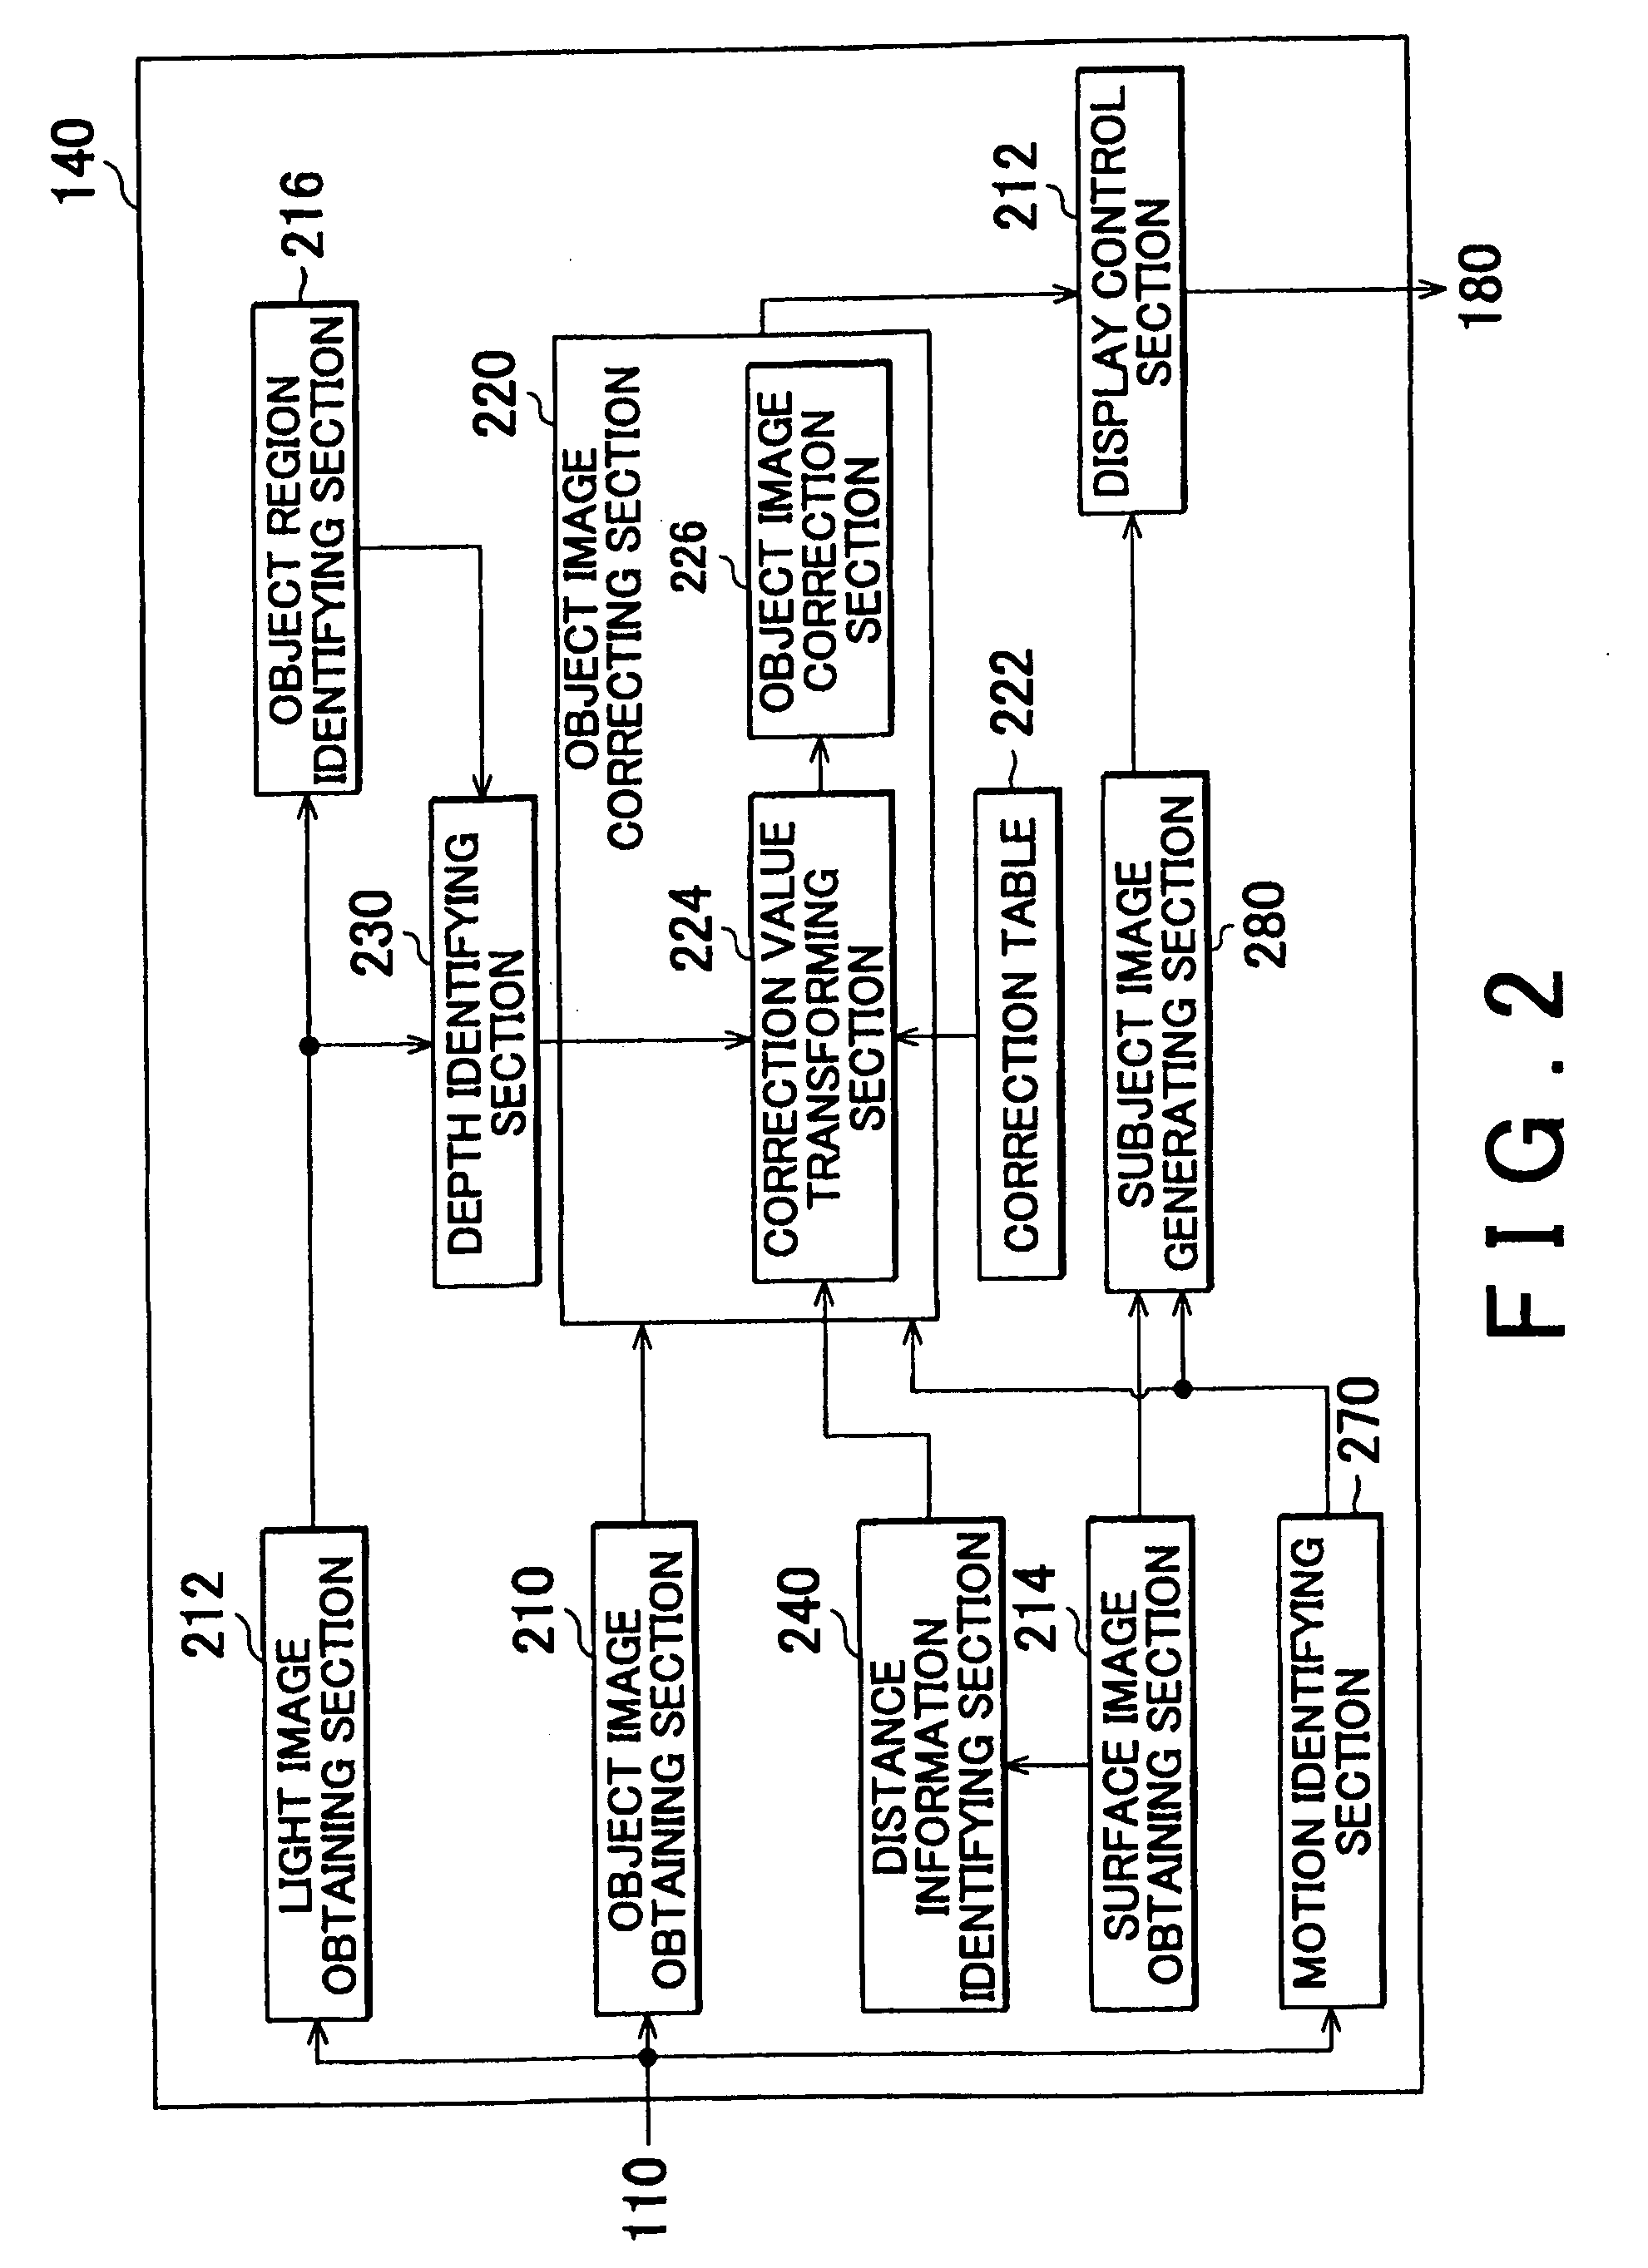 Image processing system, image processing method, and computer readable medium